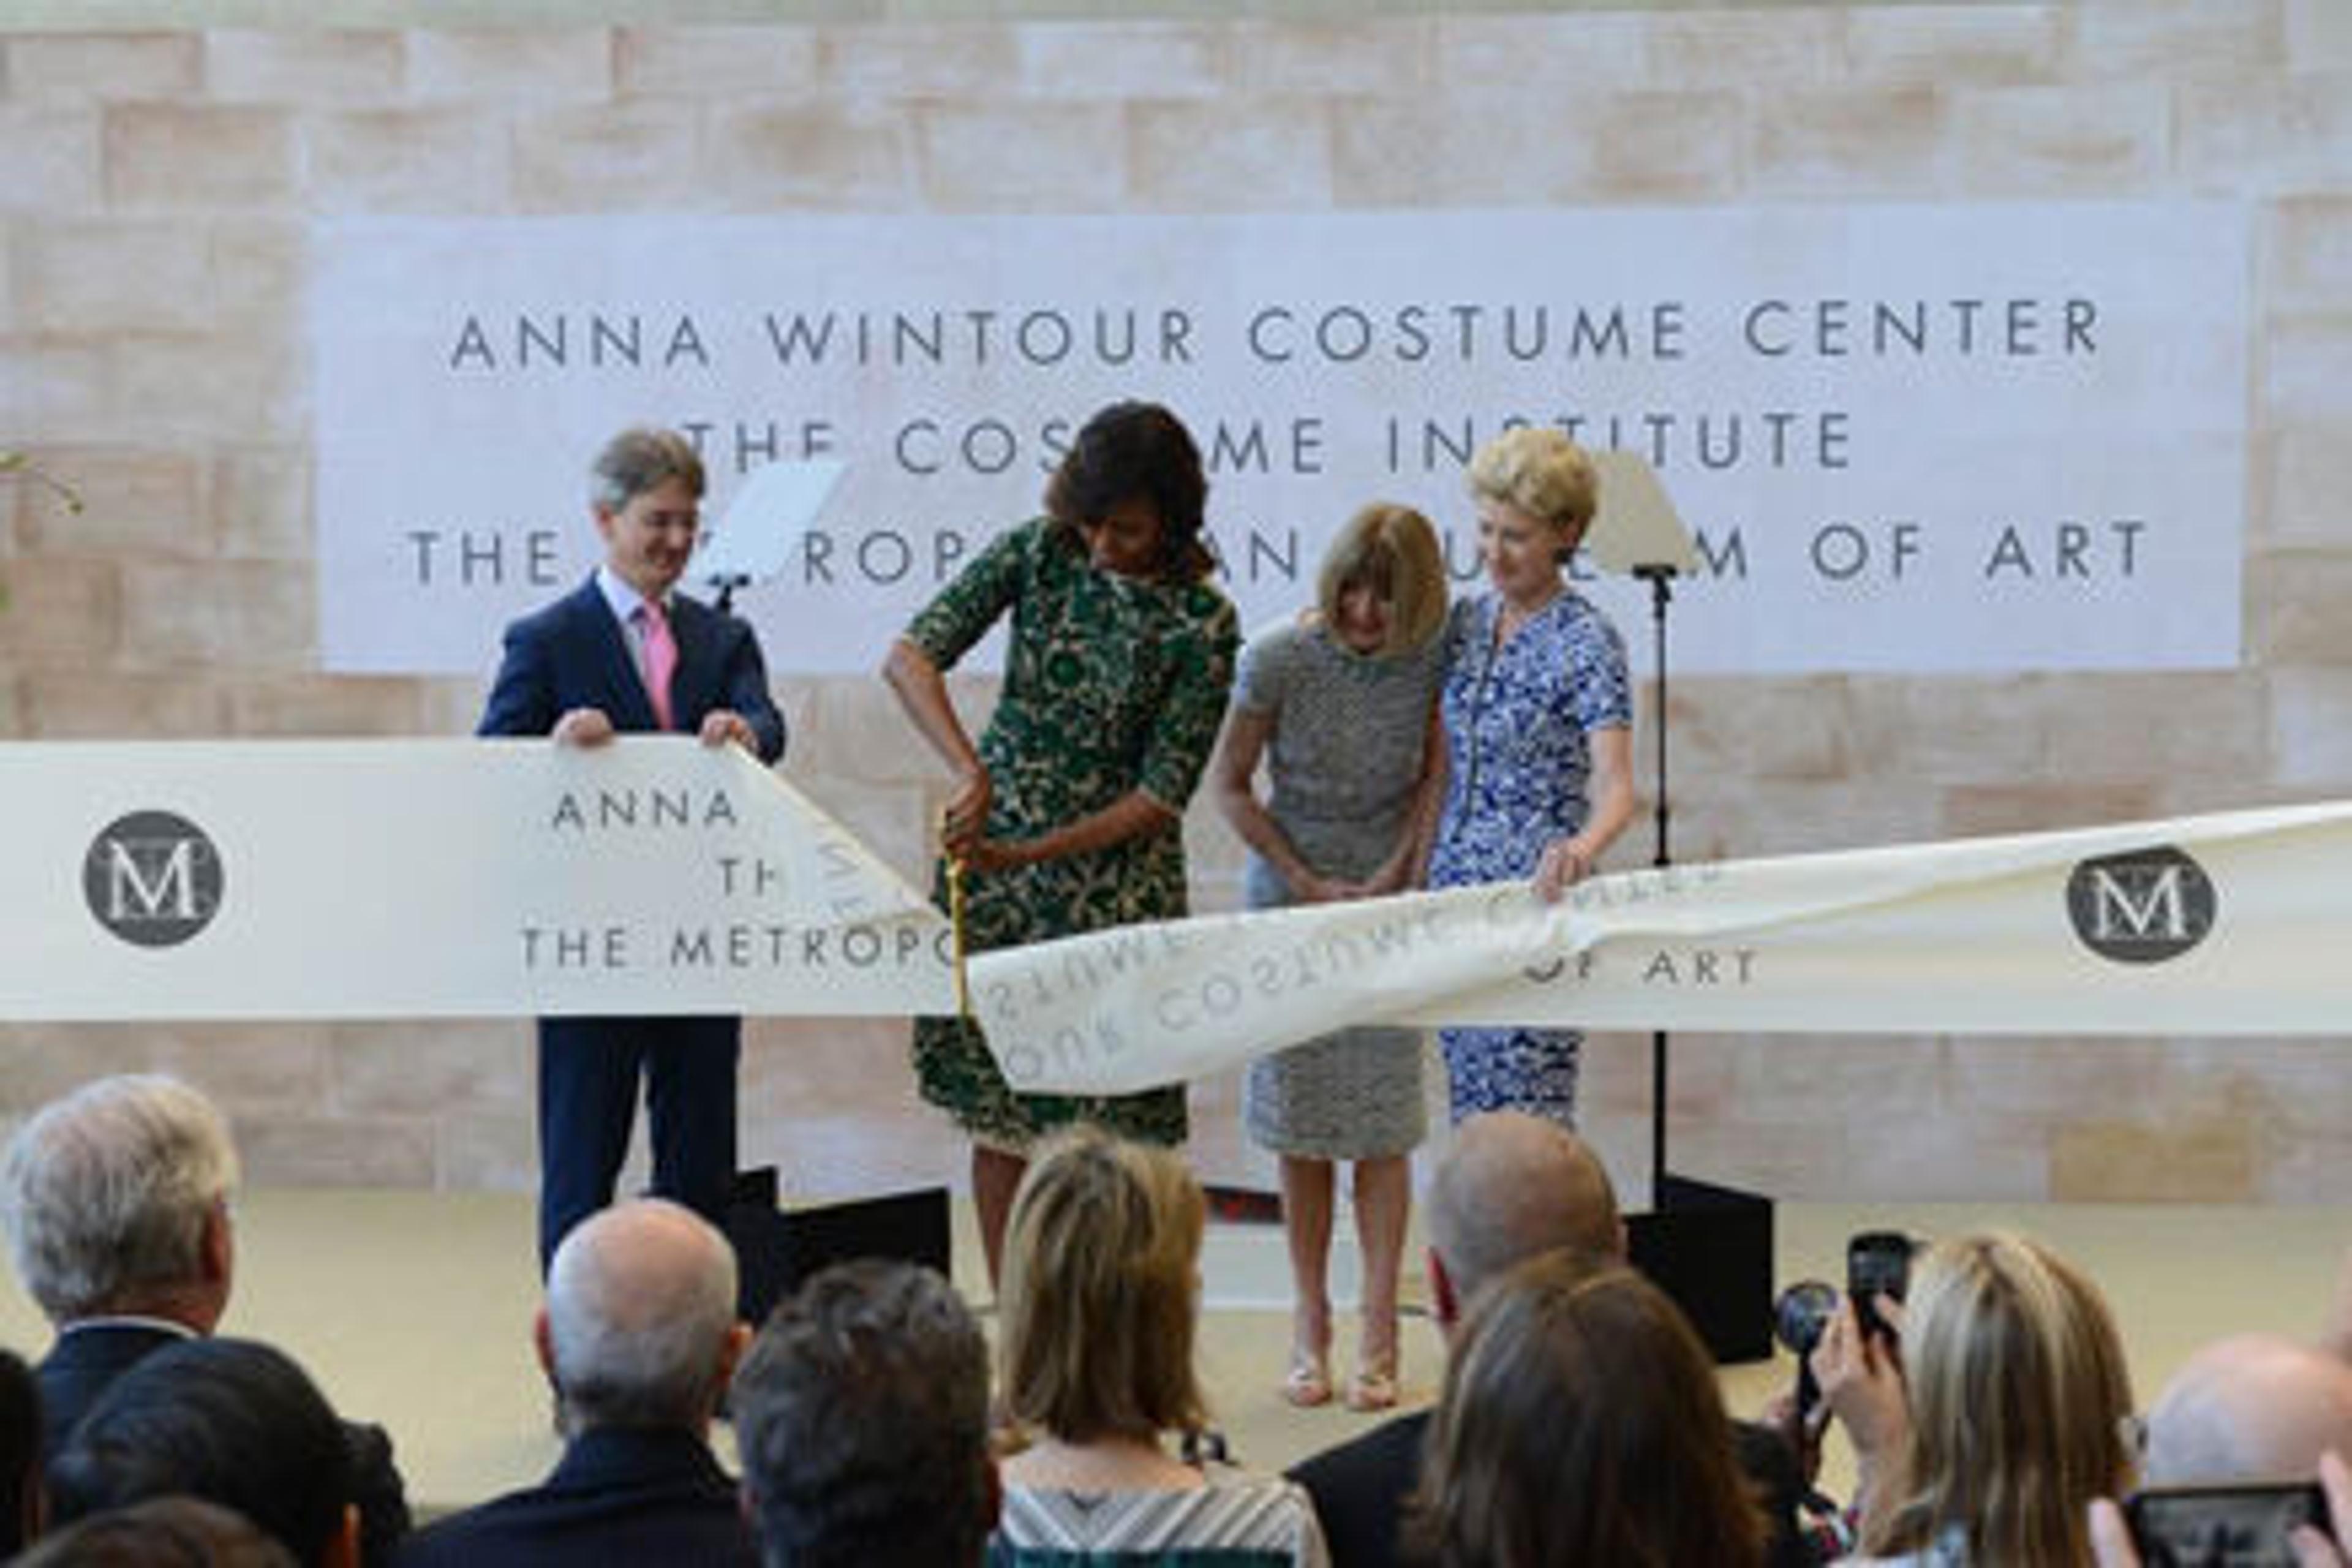 First Lady Michelle Obama cutting the ribbon to open The Costume Institute's new Anna Wintour Costume Center